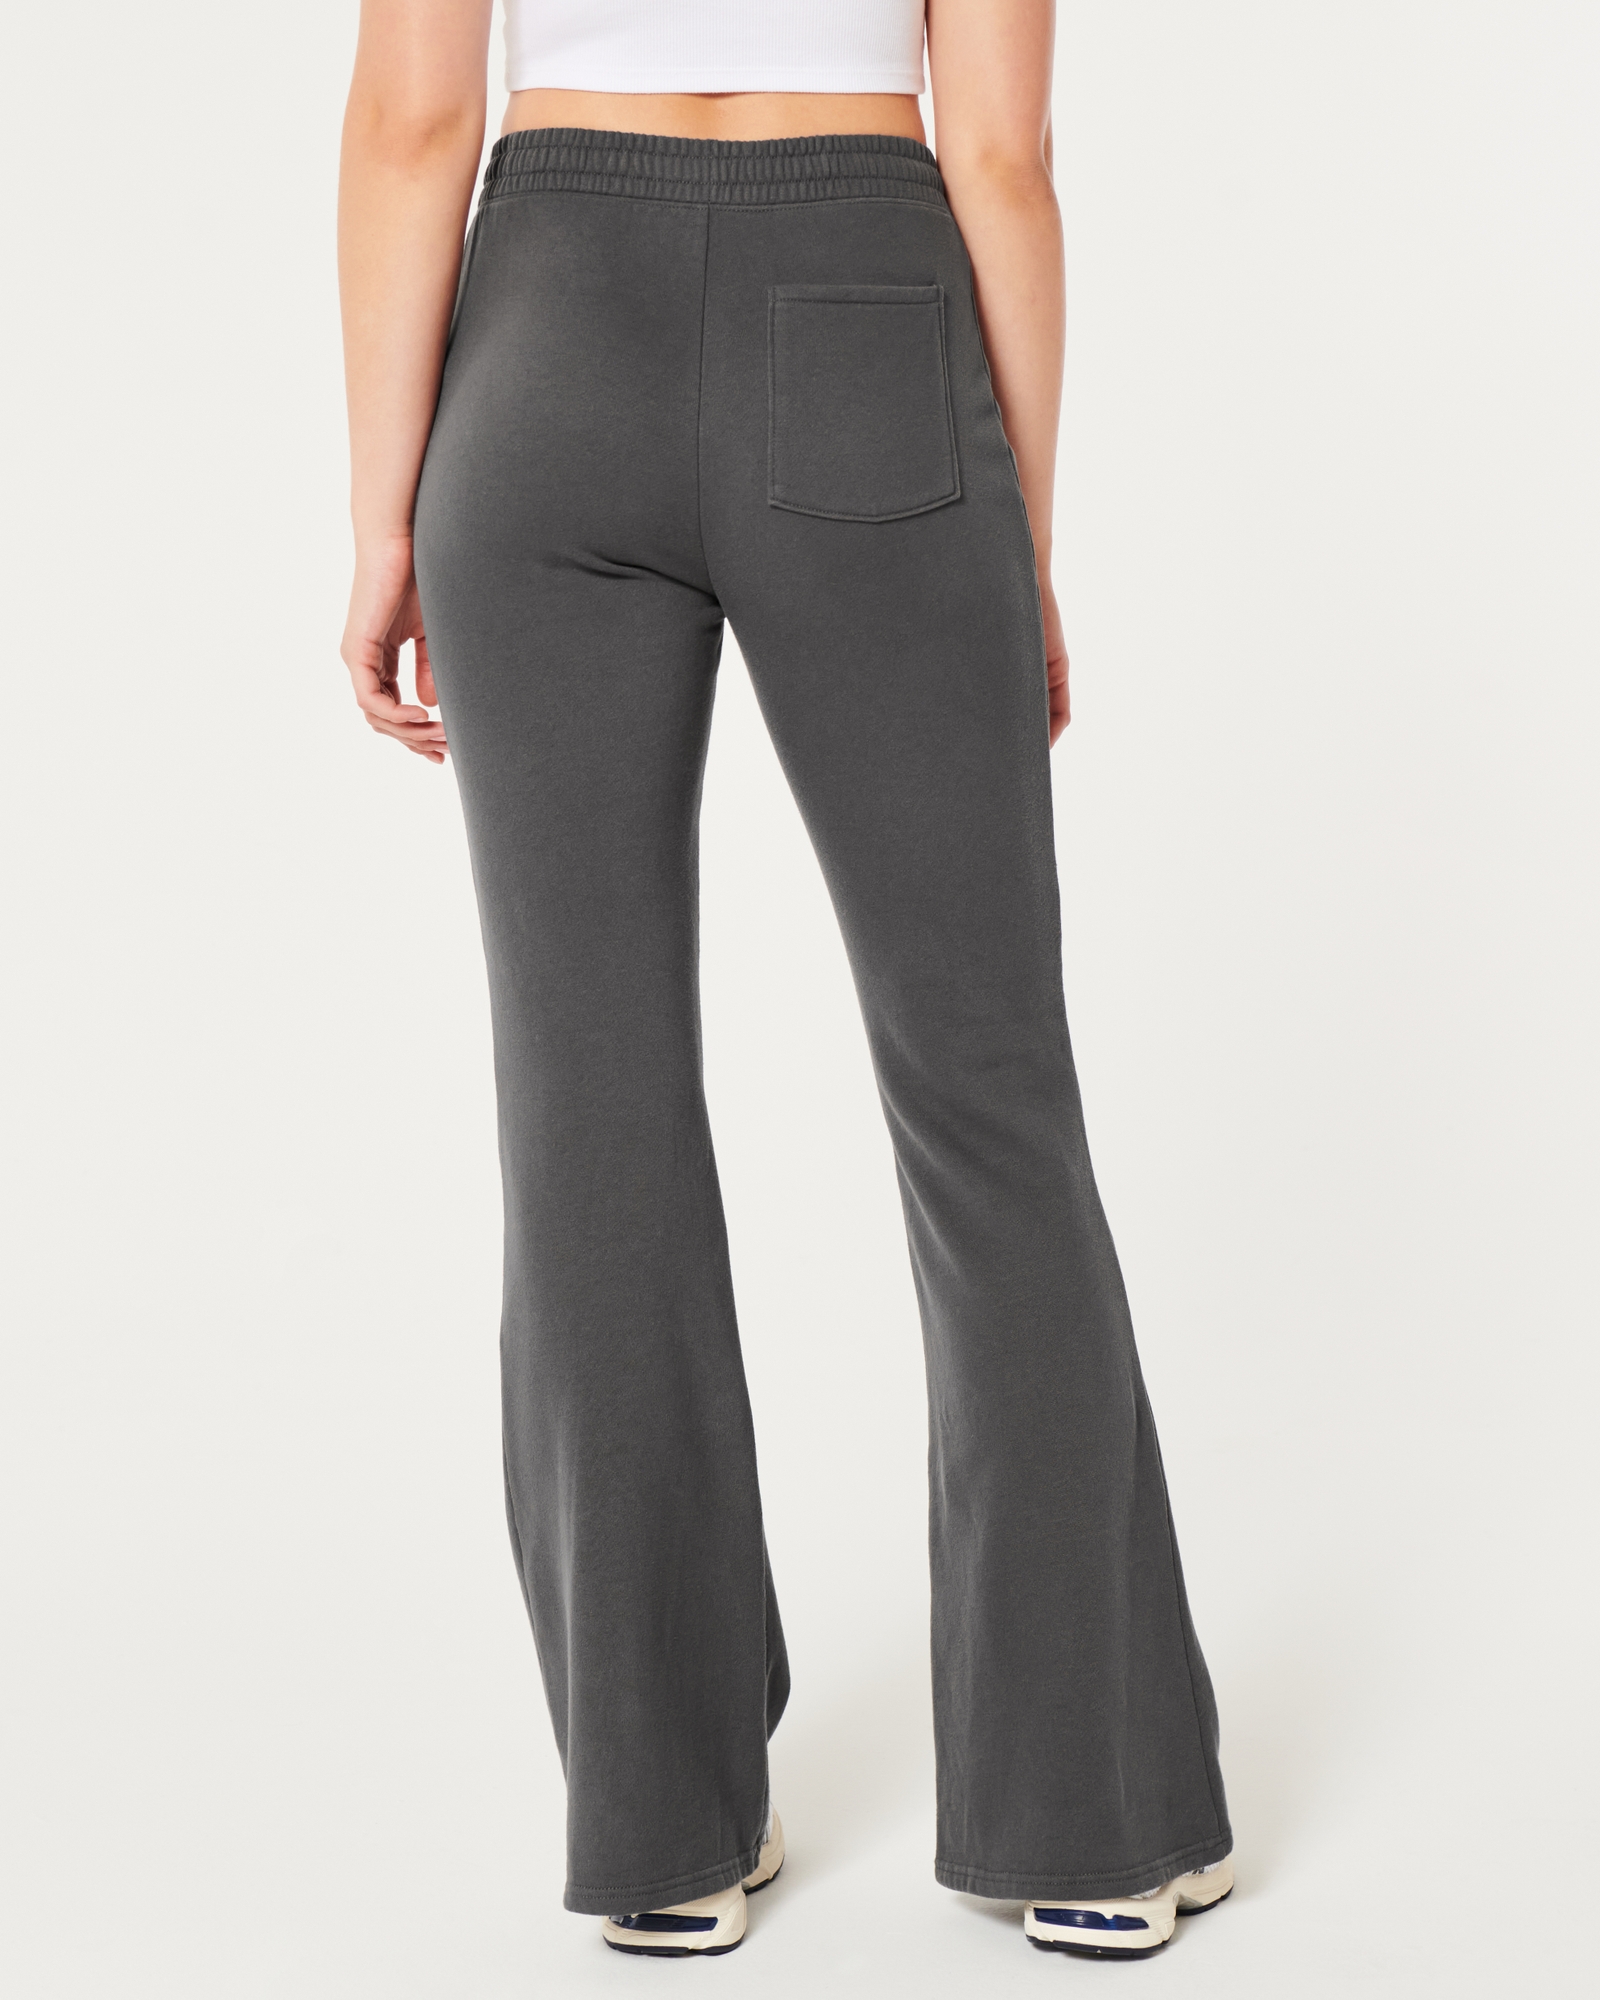 Hollister Ultra High Rise Flare, Sweatpants Gray Size M - $15 - From Sophia